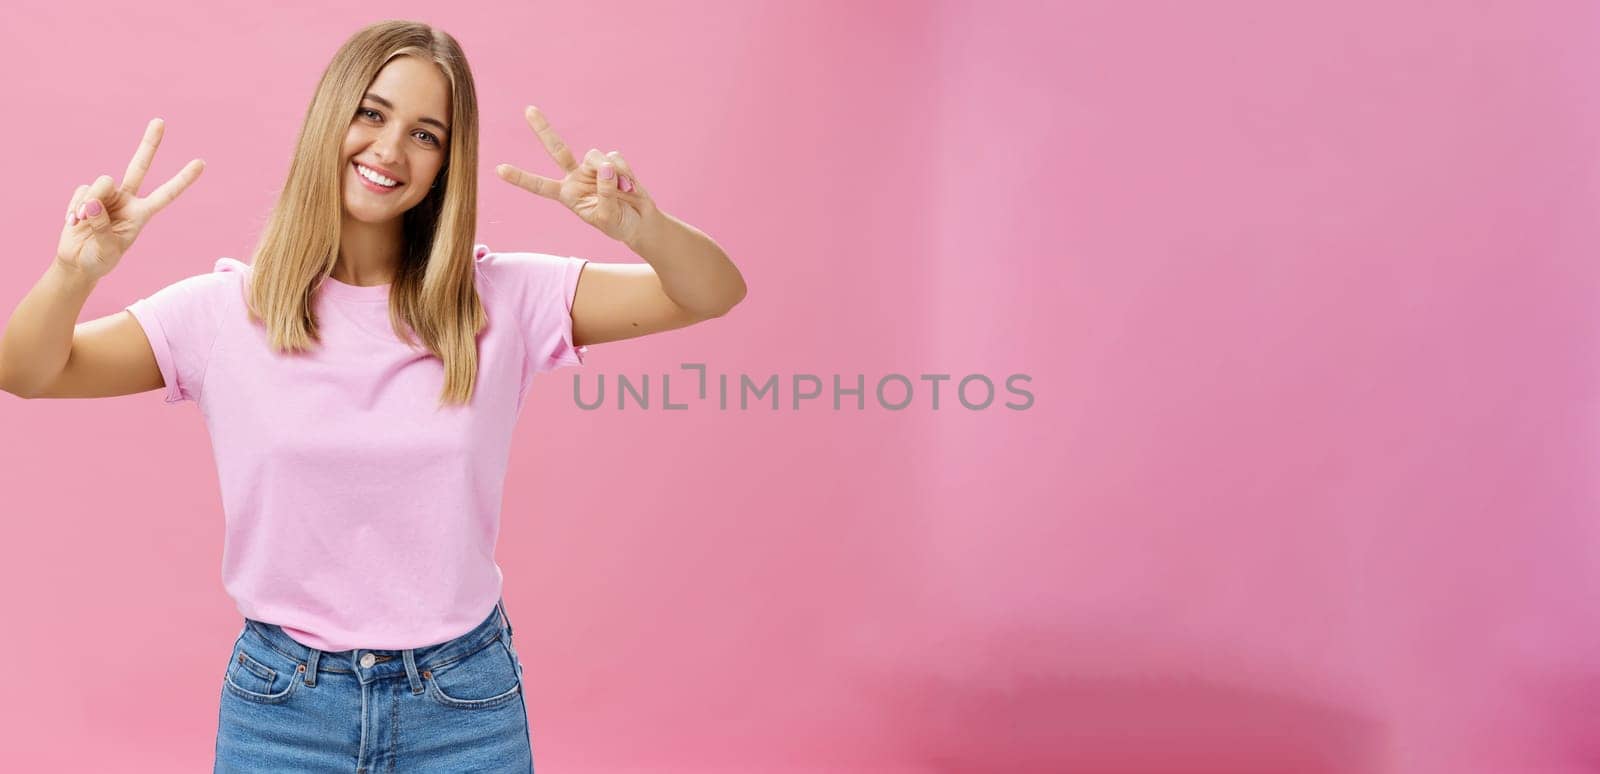 Cute chubby carefree young woman with short fair hair tilting head showing peace gestures with happy friendly smile having fun spending time amused and joyful against pink background by Benzoix